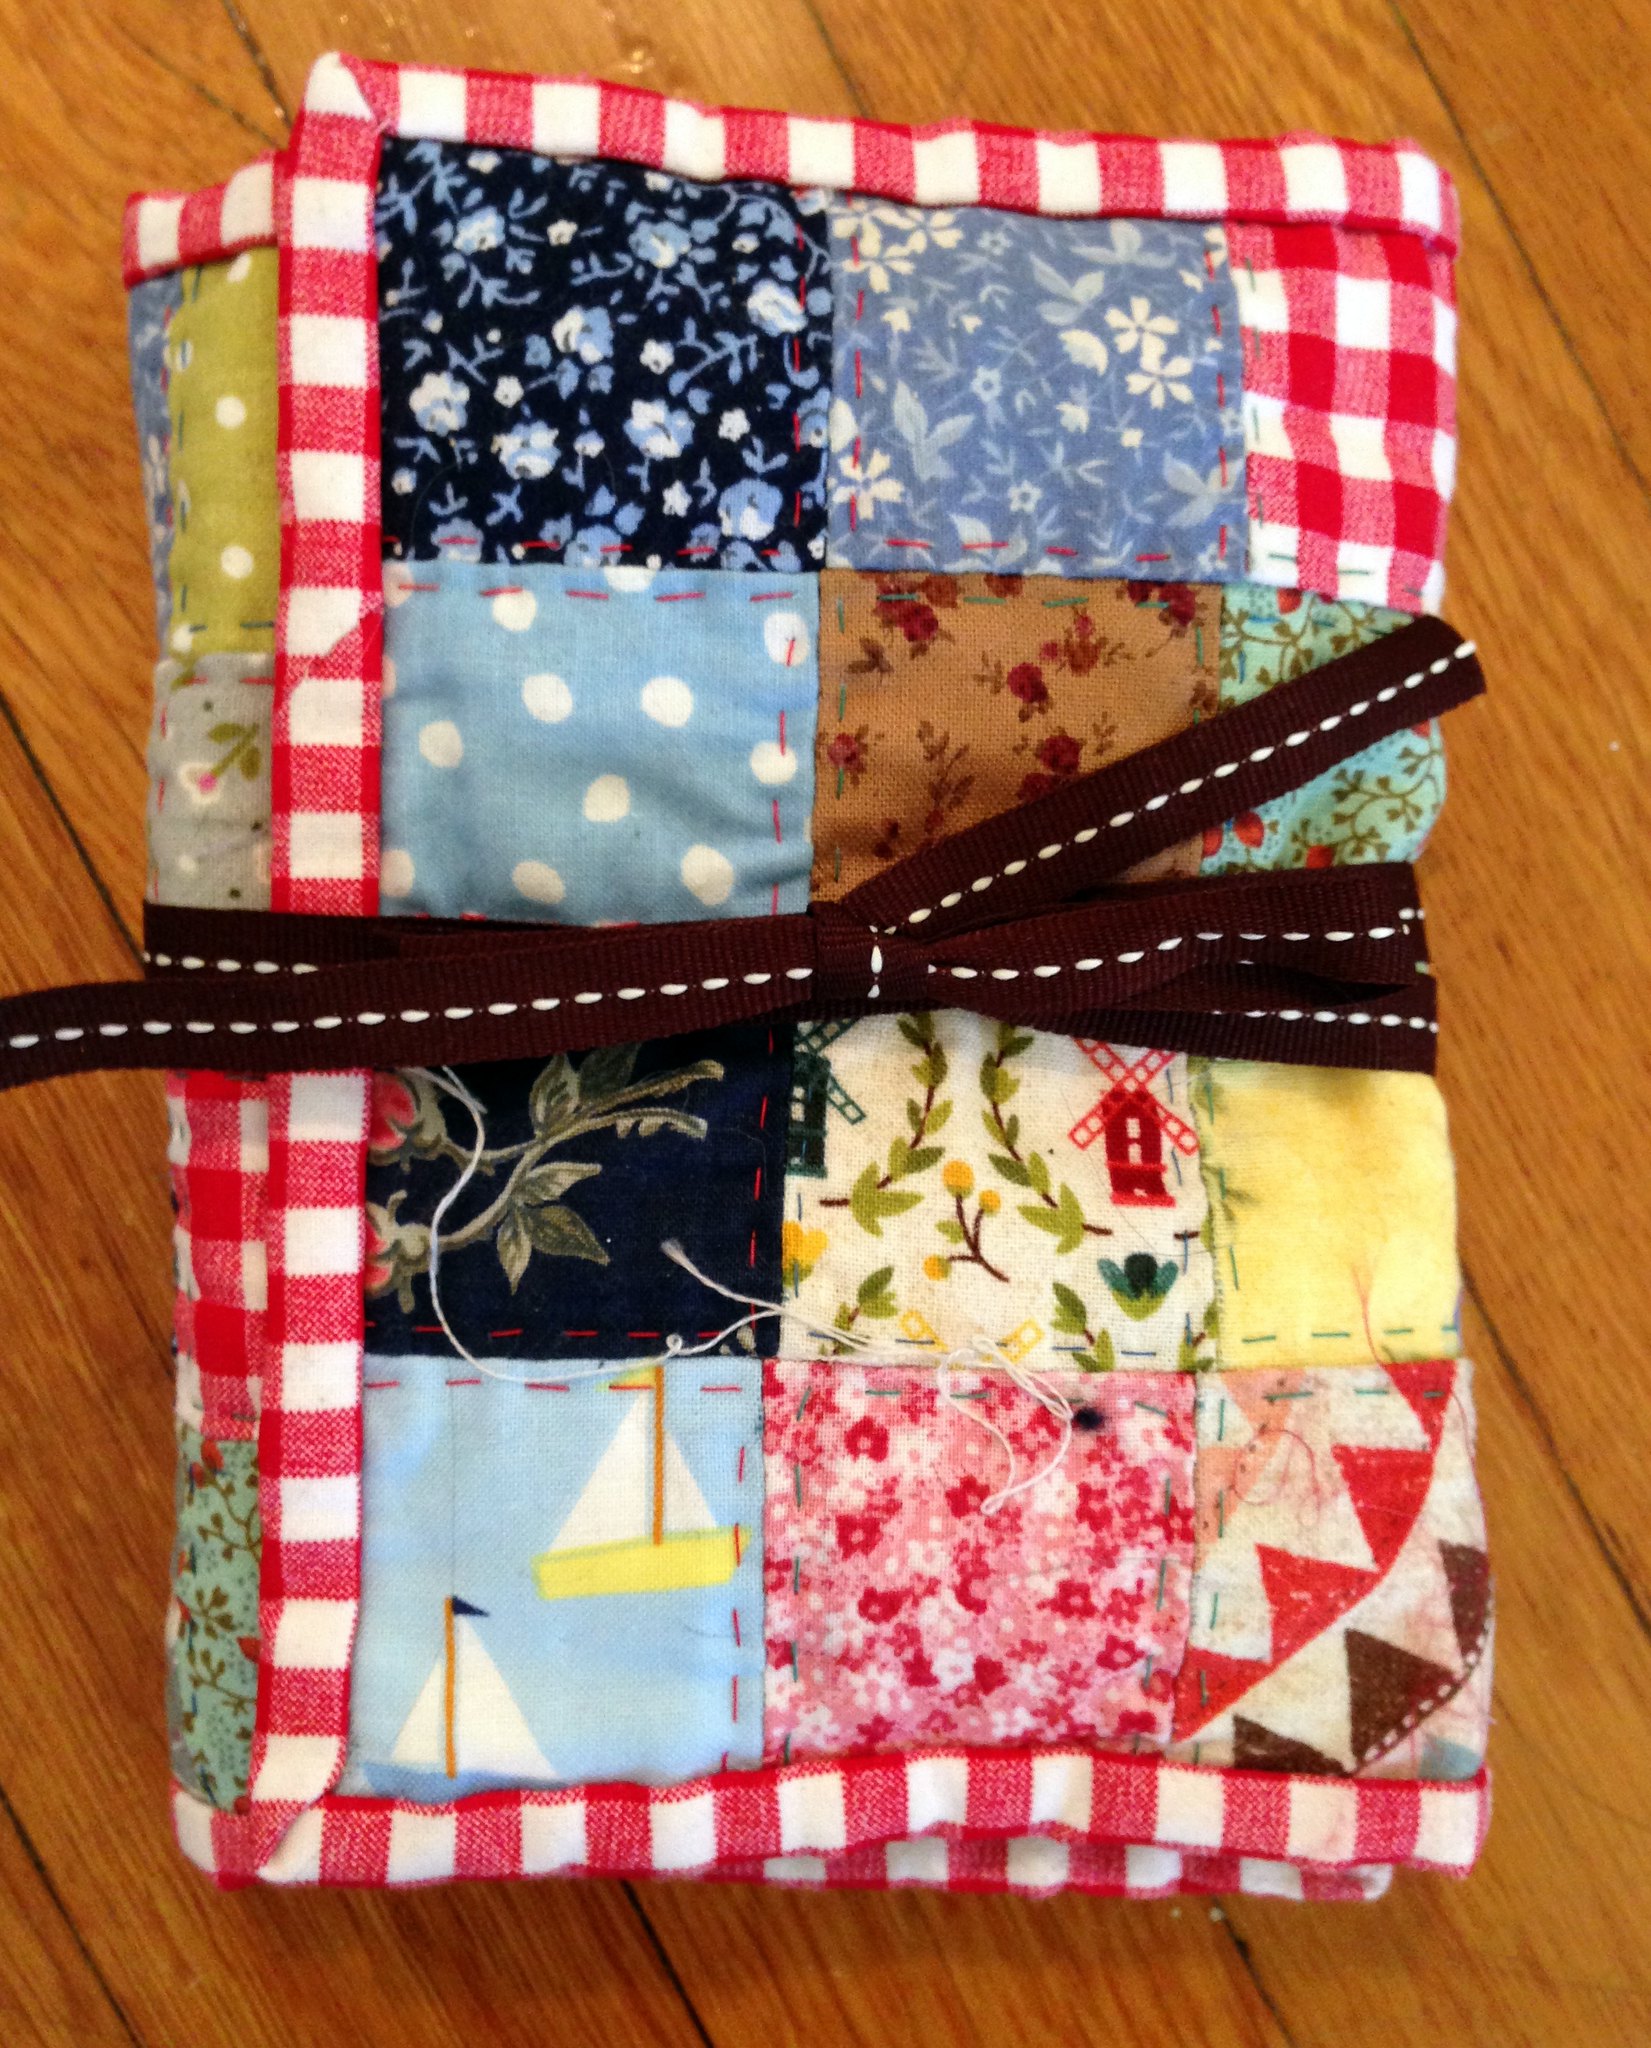 How To Make A Travel Sewing Kit